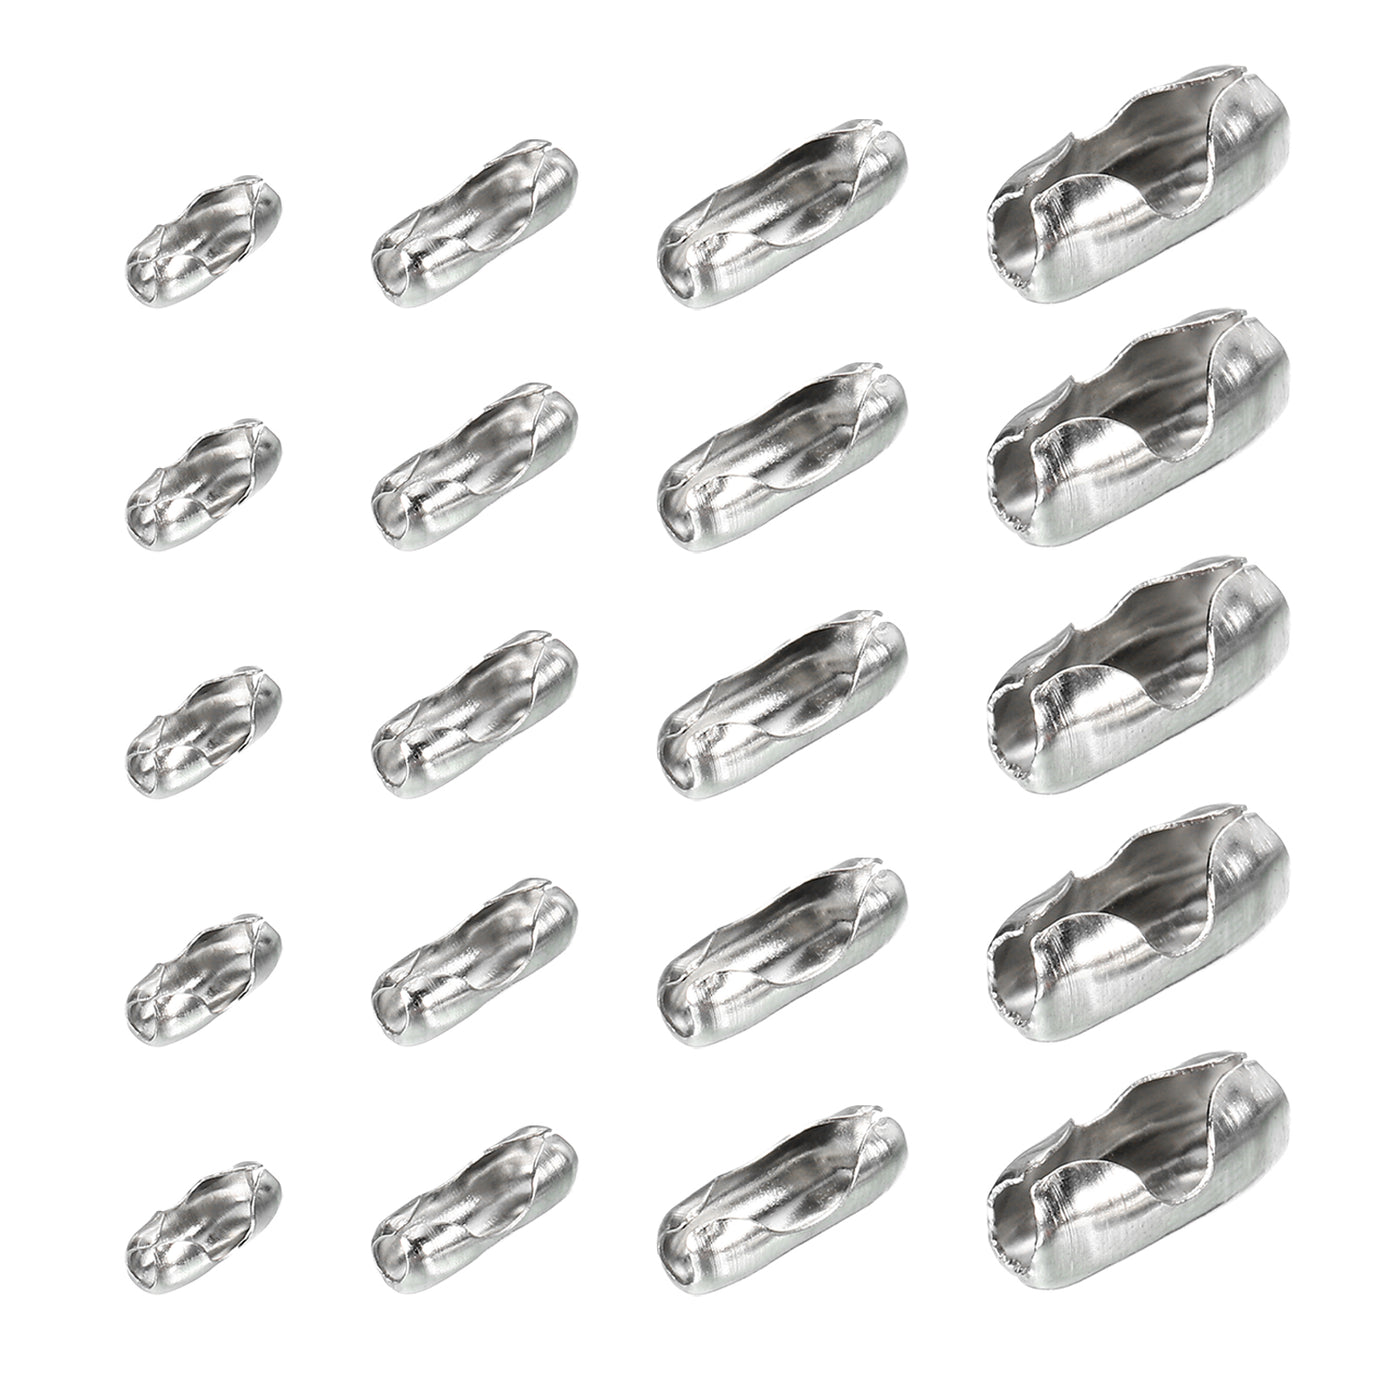 Harfington Ball Chain Connector Clasps, Stainless Steel Replacement Cord Connector Fit for 2/2.4/3.2/4mm Beaded Ball Chain, Silver Pack of 120